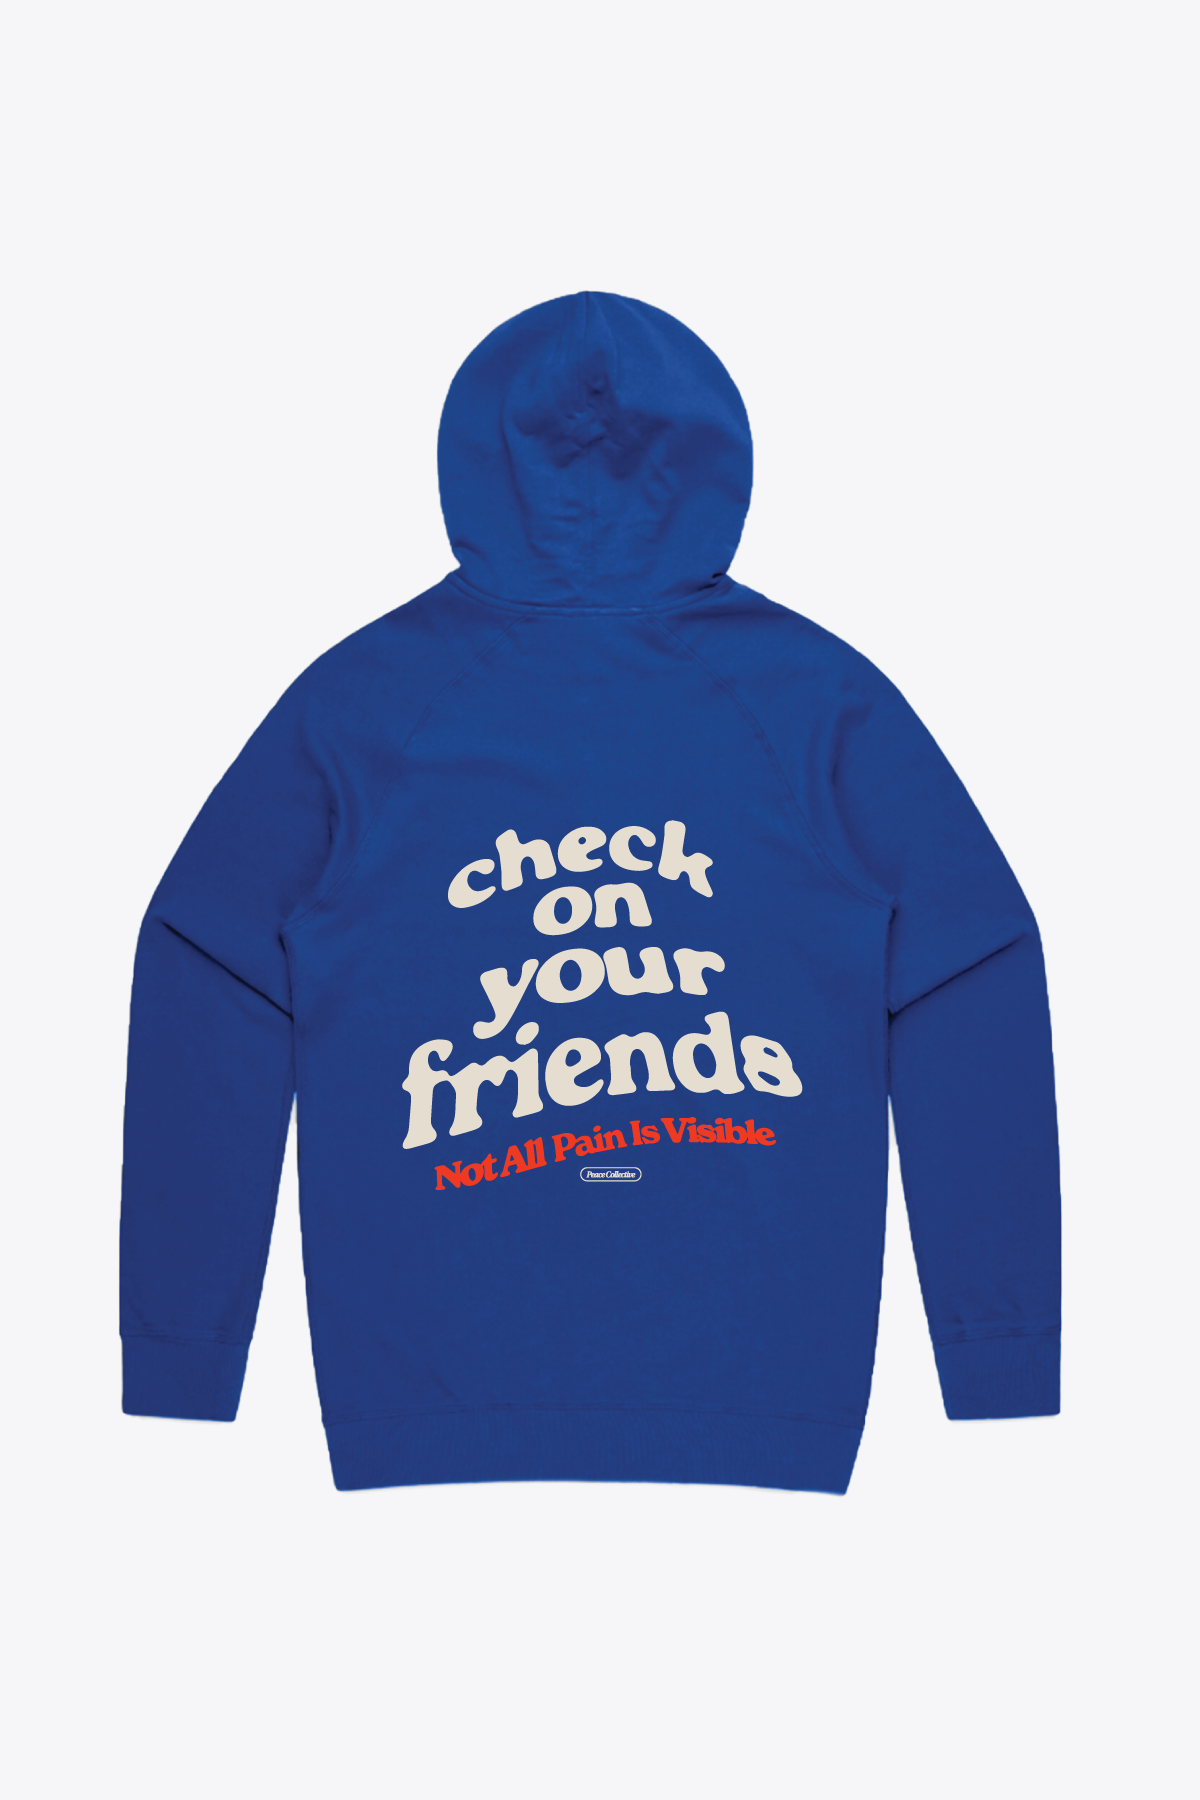 Check on your friends Hoodie - Royal